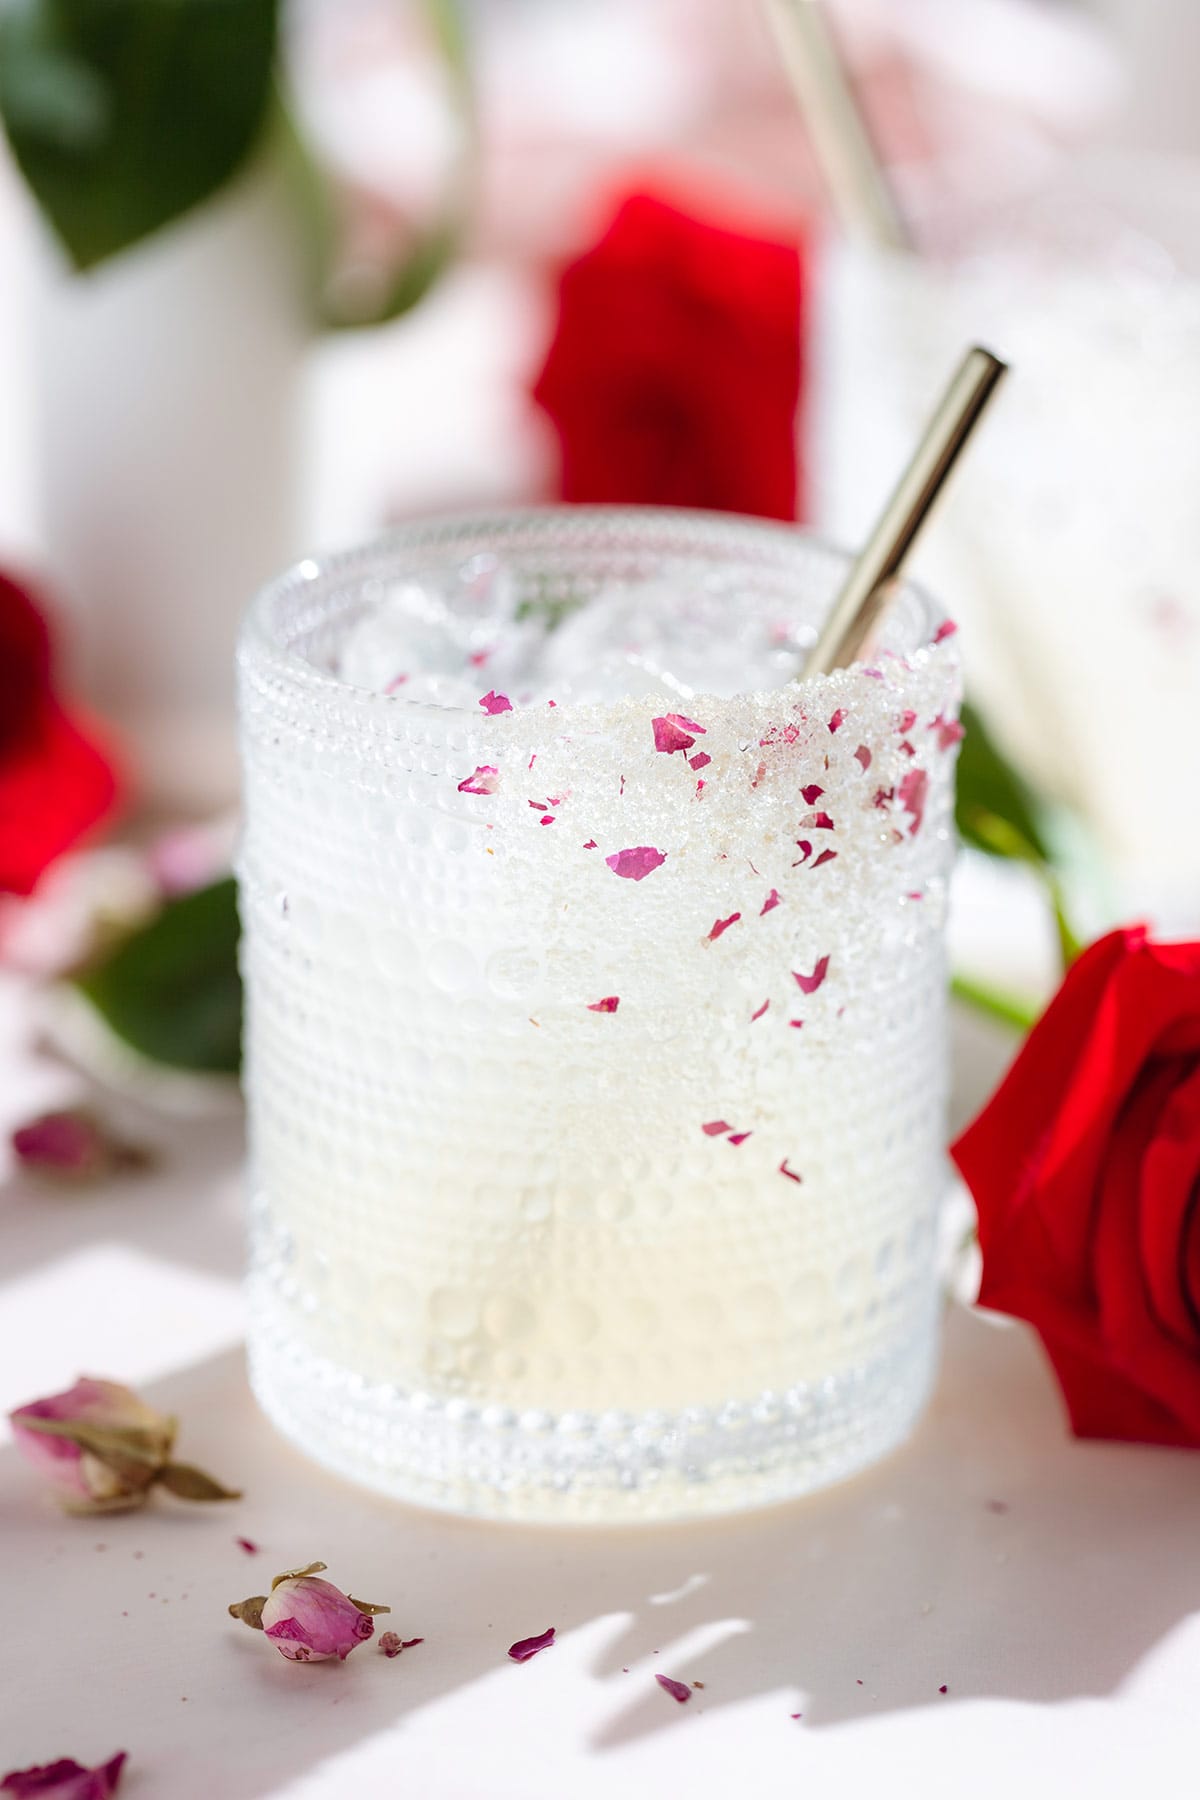 A margarita cocktail in a short glass garnished with a sugar rim with crushed dried rose petals and a gold straw.